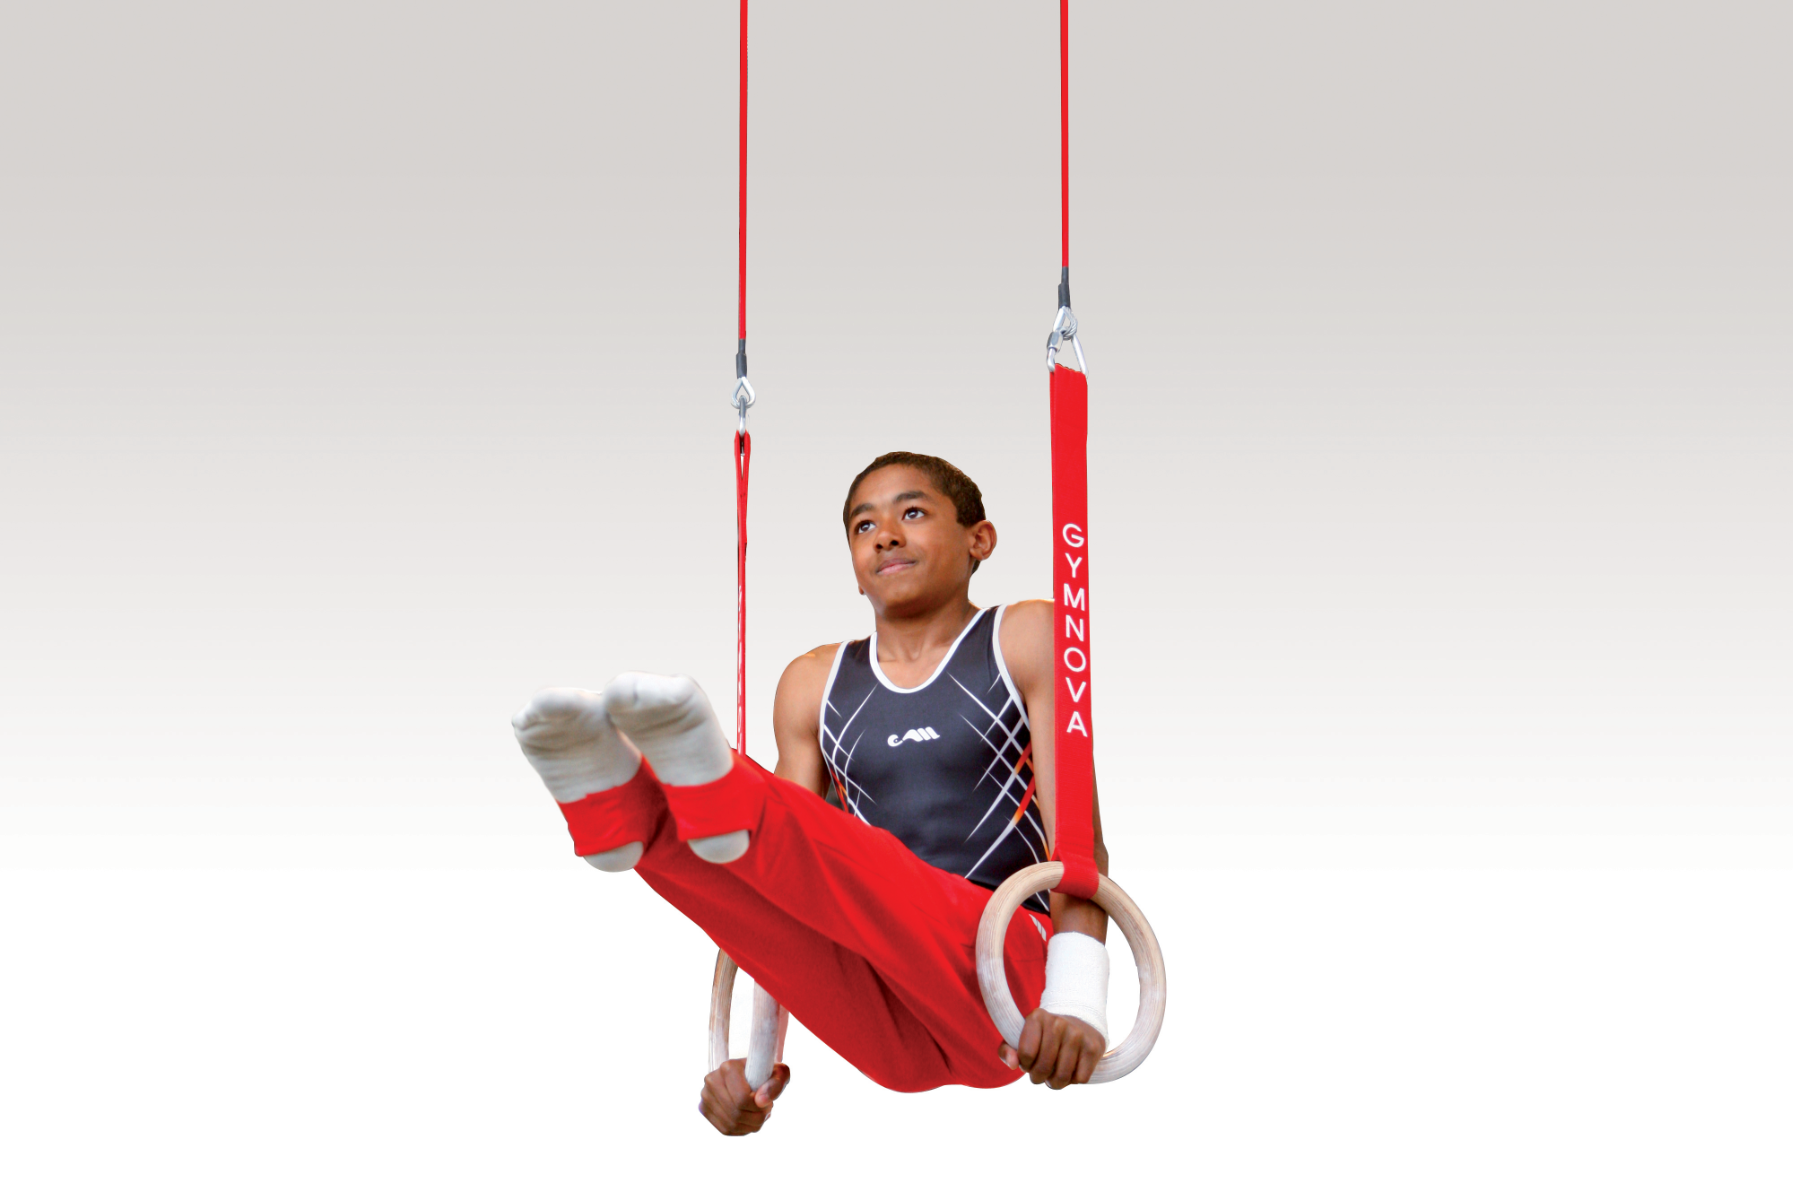 Human Hanging Gymnastic Rings Old School Stock Photo 162453185 |  Shutterstock